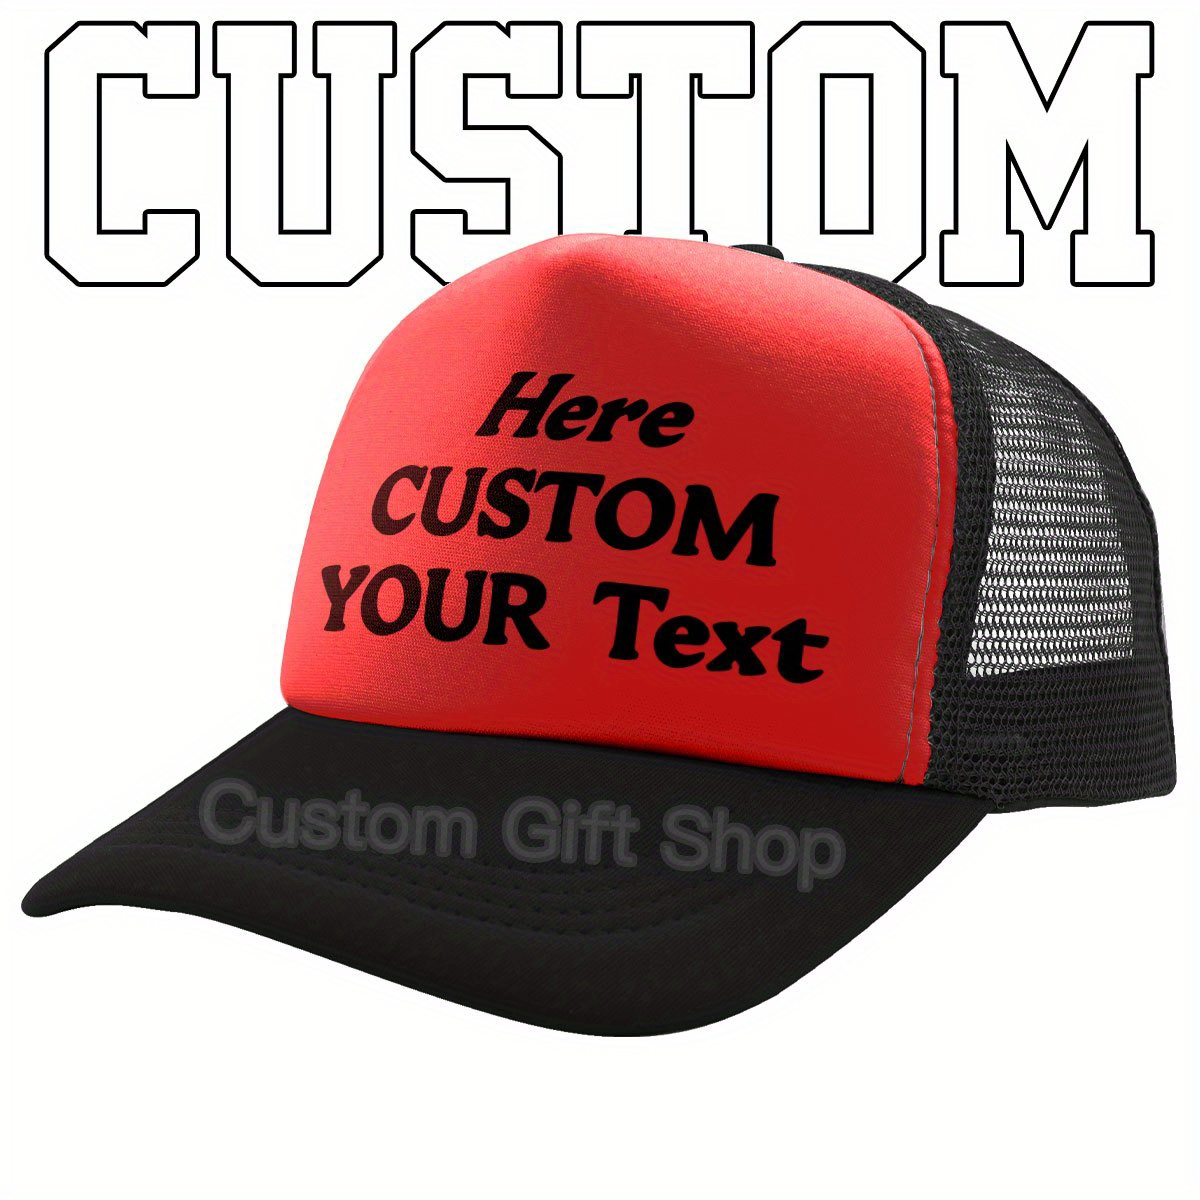 

Customizable Breathable Mesh Baseball Cap - Adjustable, Lightweight Trucker Hat With Personalized Text Option, Unisex Design For Men & Women